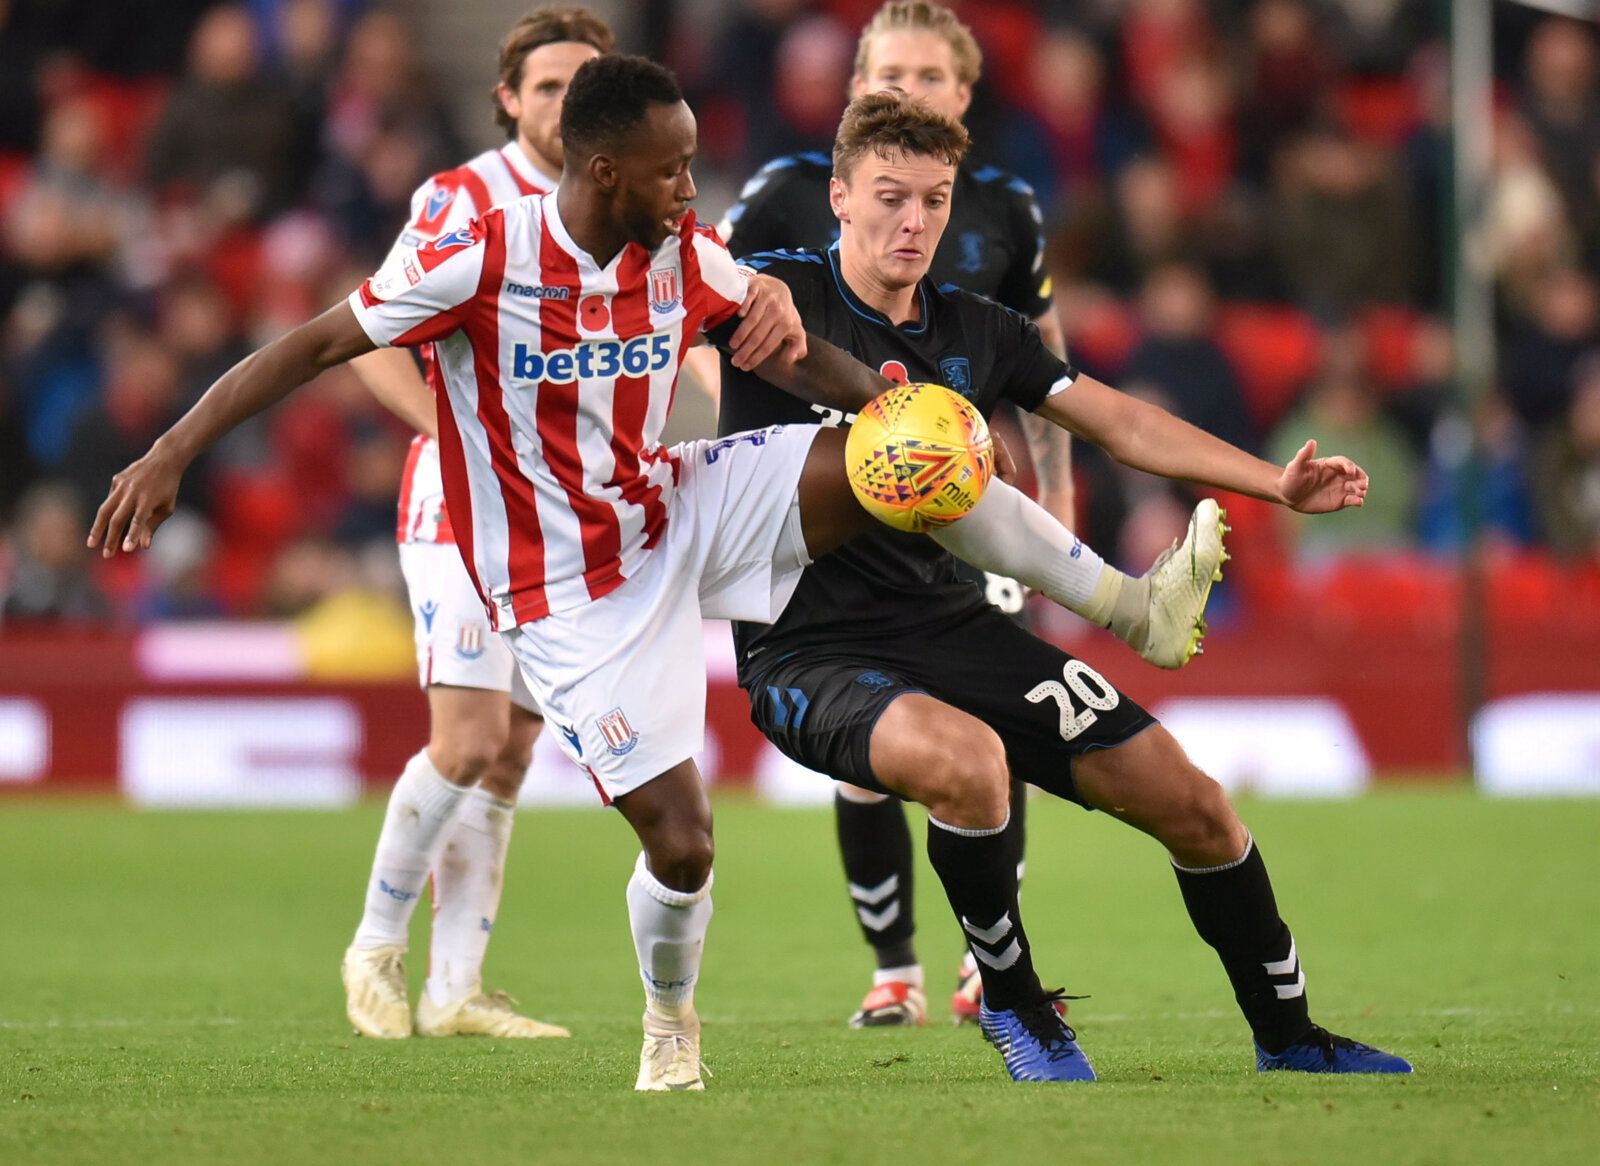 Soccer Football - Championship - Stoke City v Middlesbrough - bet365 Stadium, Stoke-on-Trent, Britain - November 3, 2018   Stoke City's Saido Berahino in action with Middlesbrough's Dael Fry   Action Images/Paul Burrows    EDITORIAL USE ONLY. No use with unauthorized audio, video, data, fixture lists, club/league logos or 